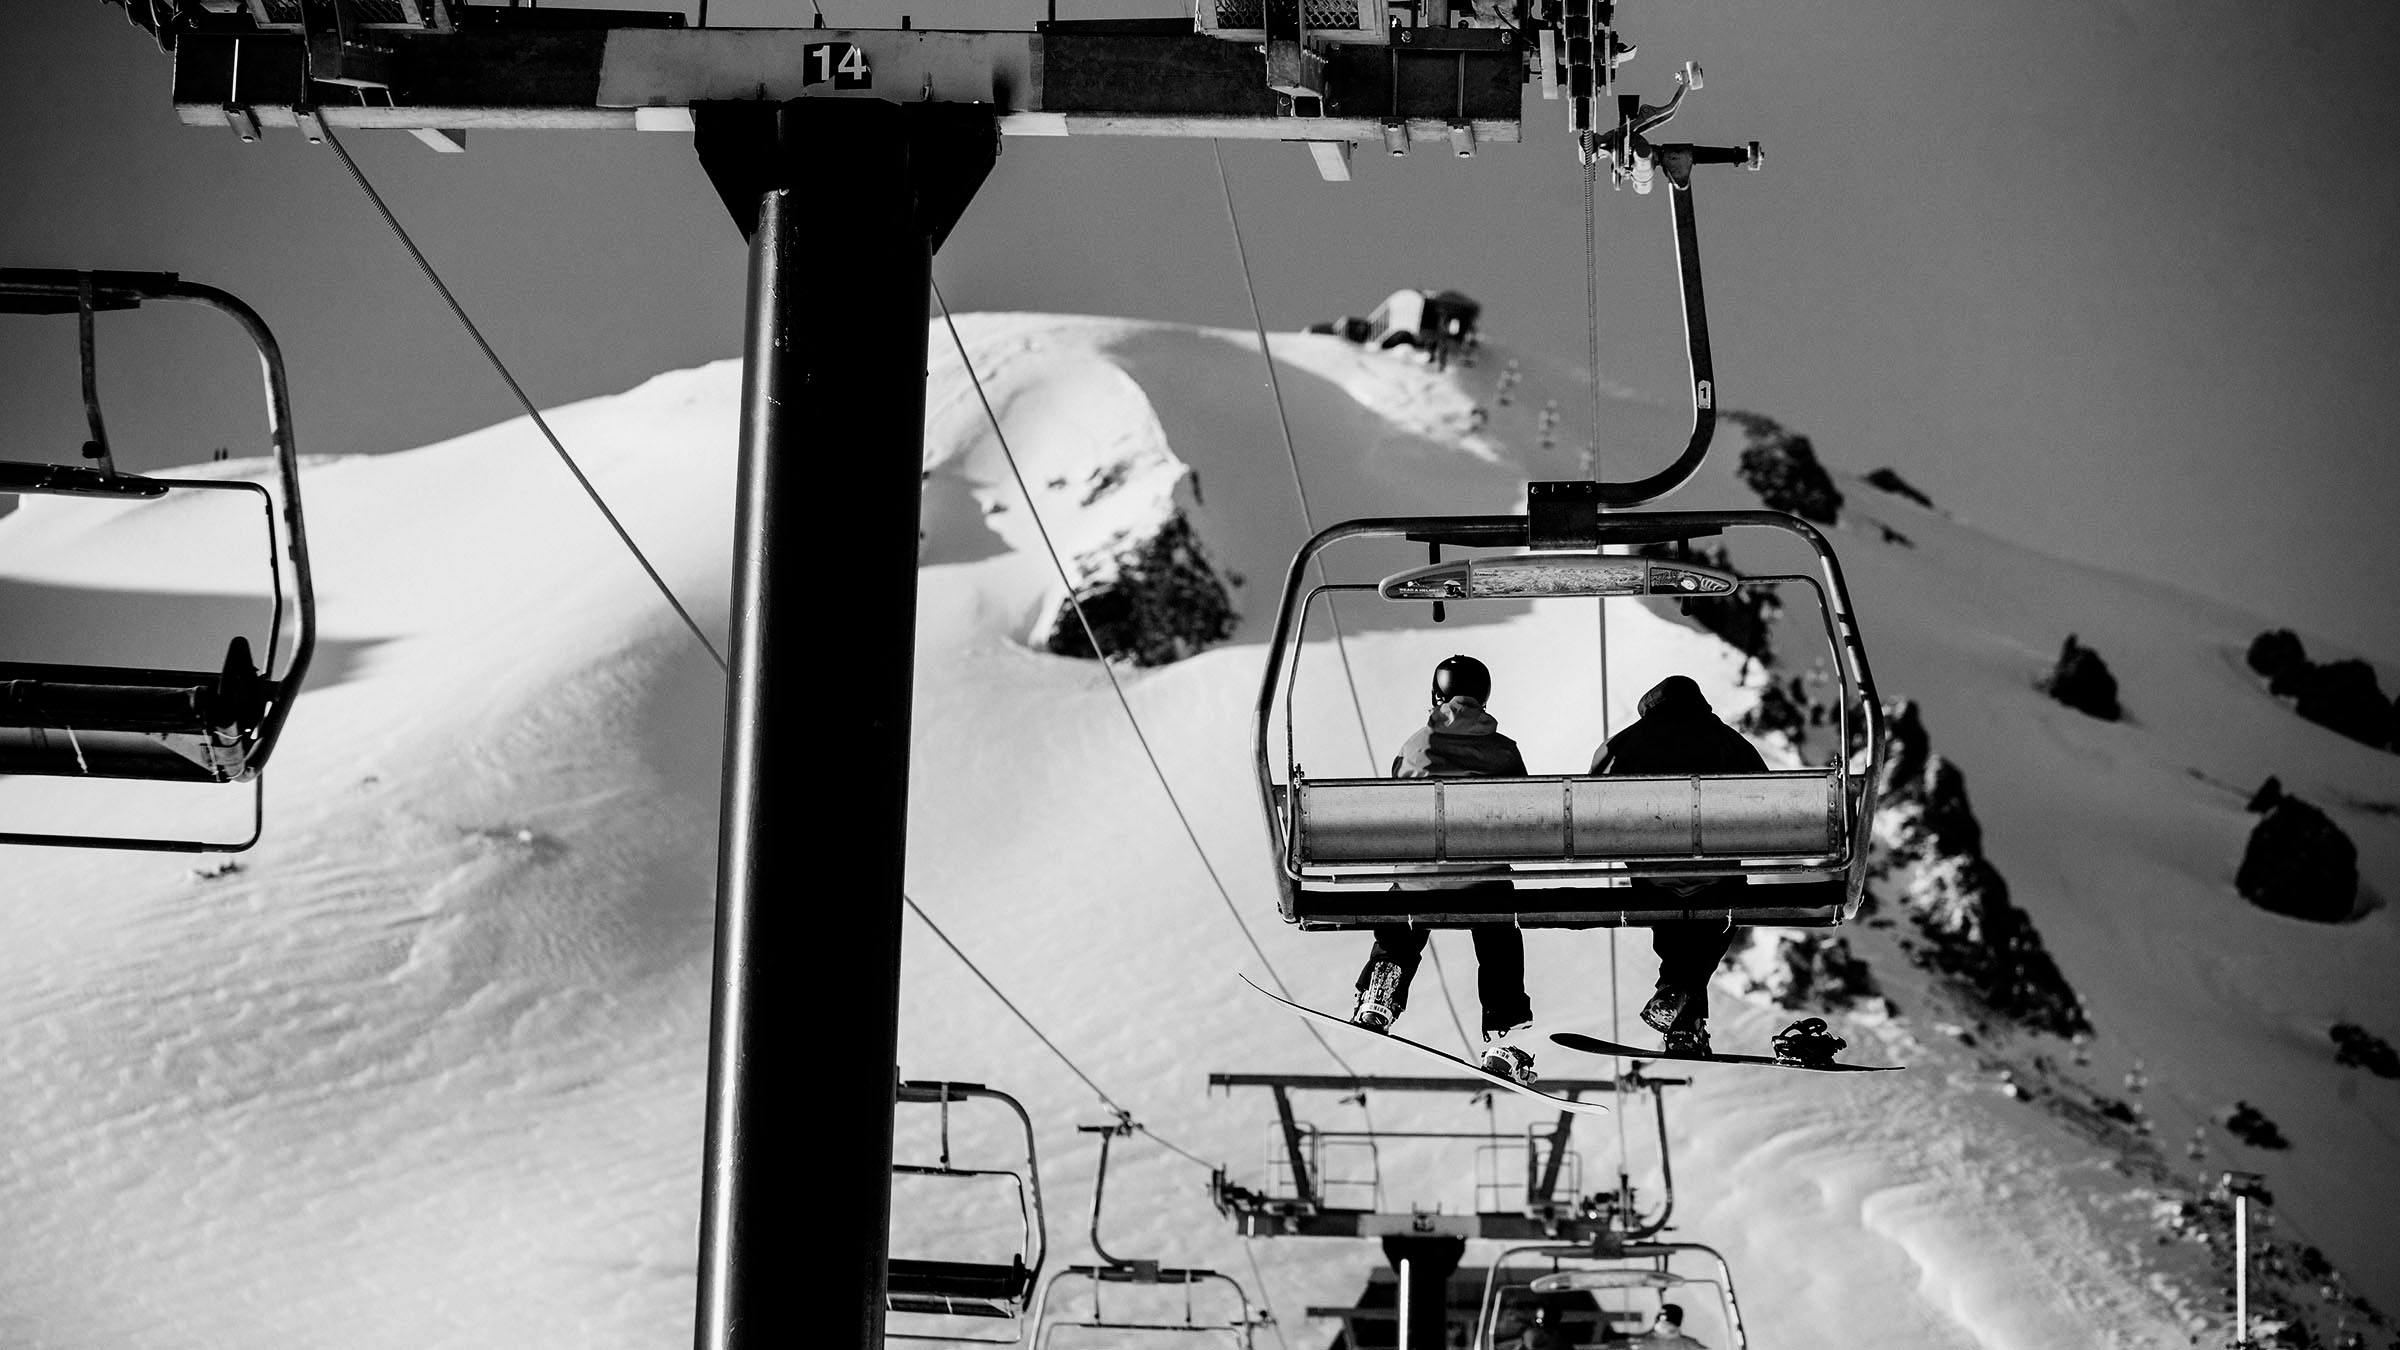 Two people on chairlift